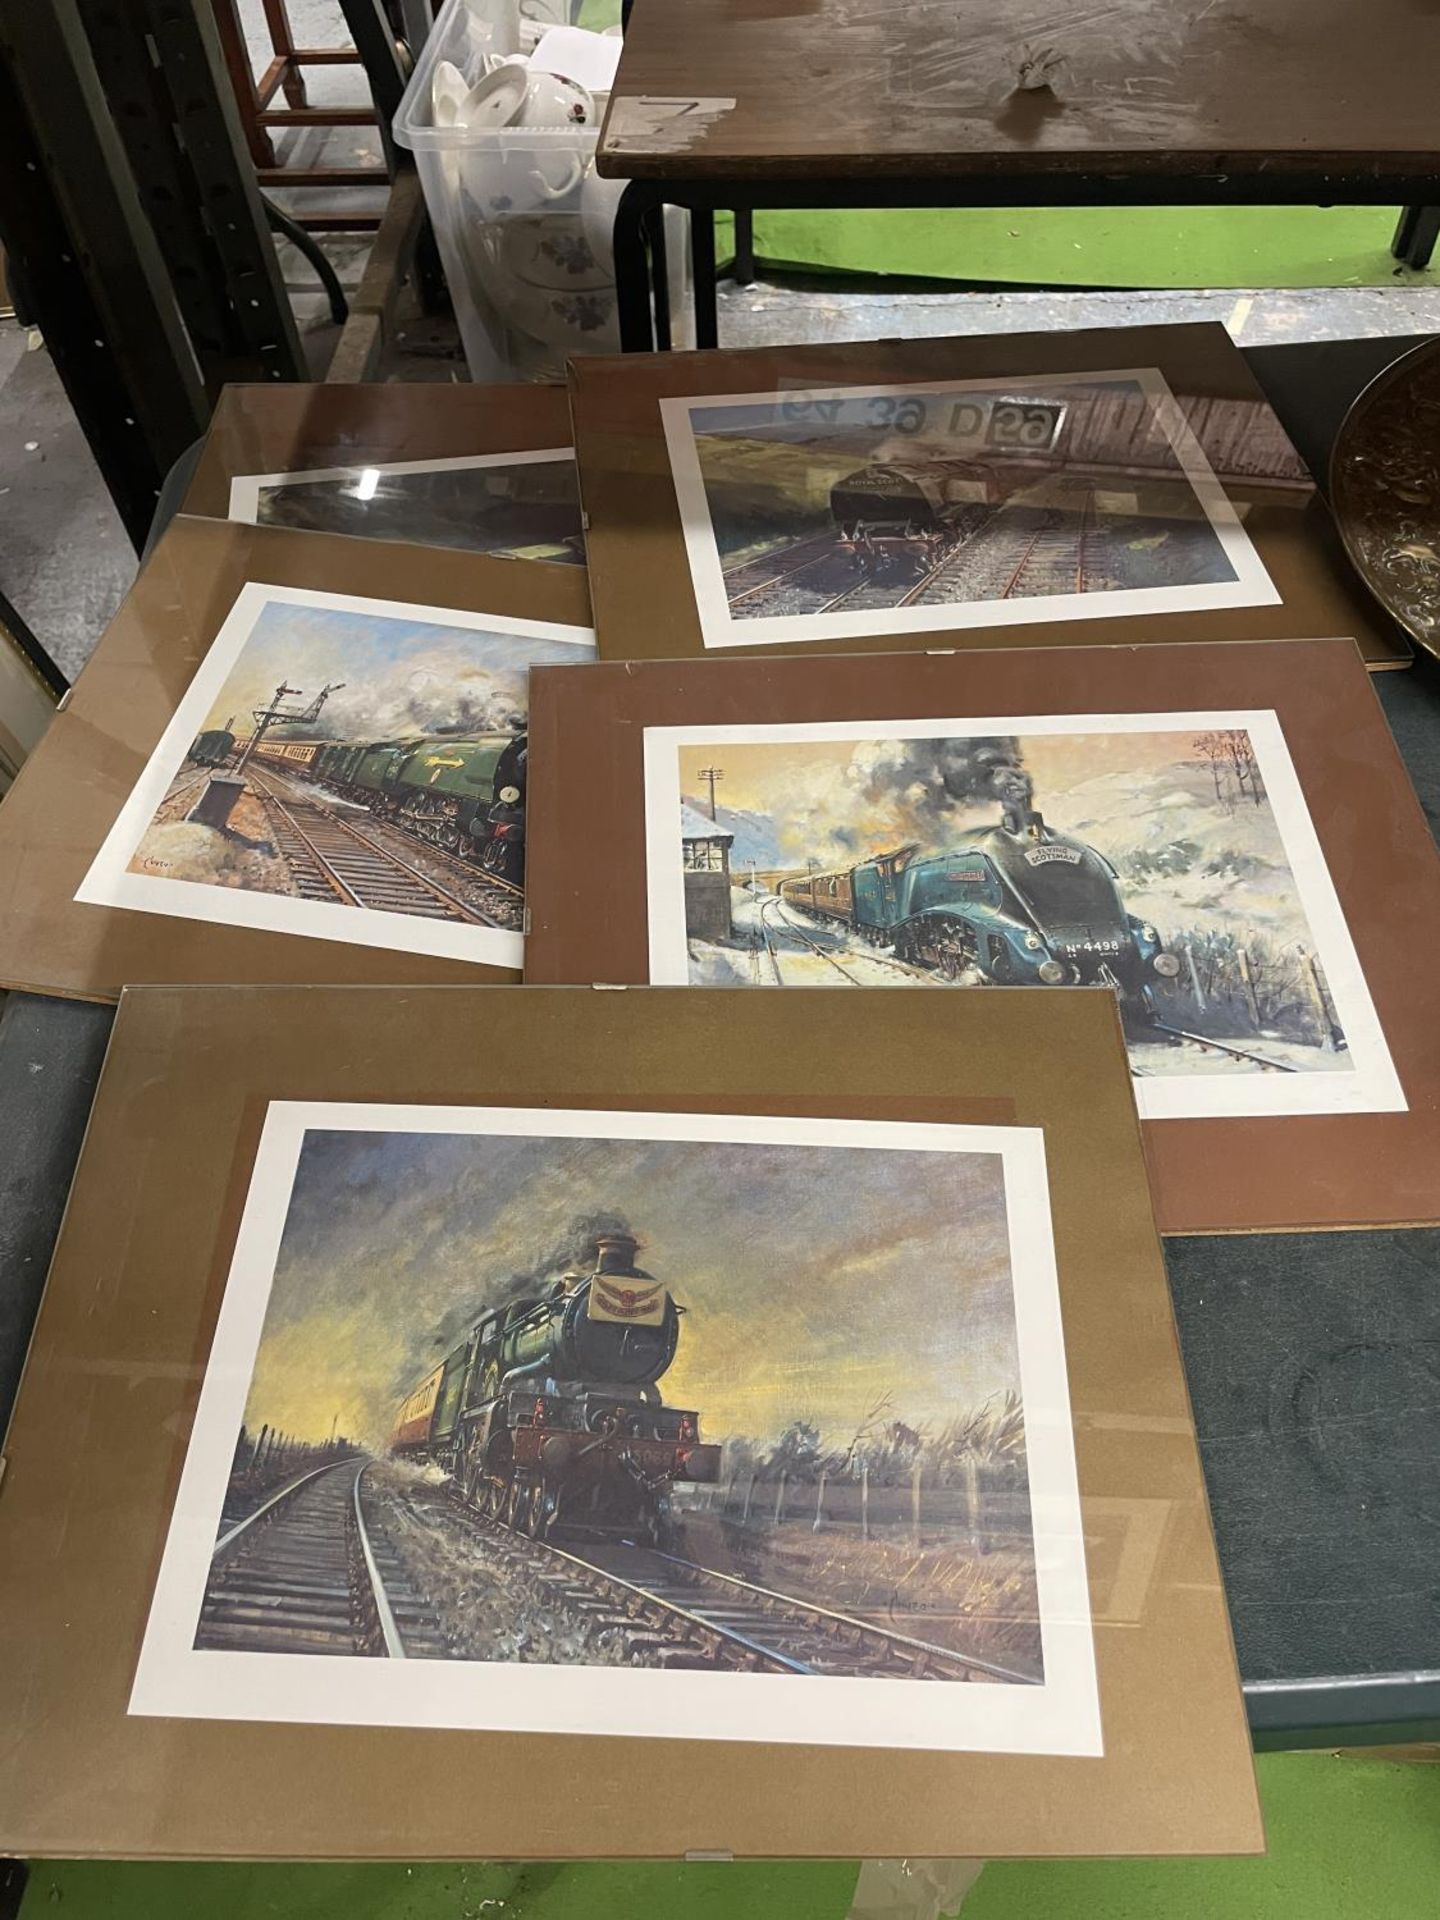 FIVE VINTAGE STYLE PRINTS OF STEAM ENGINES TO INCLUDE THE FLYING SCOTSMAN, GOLDEN AROW, ETC